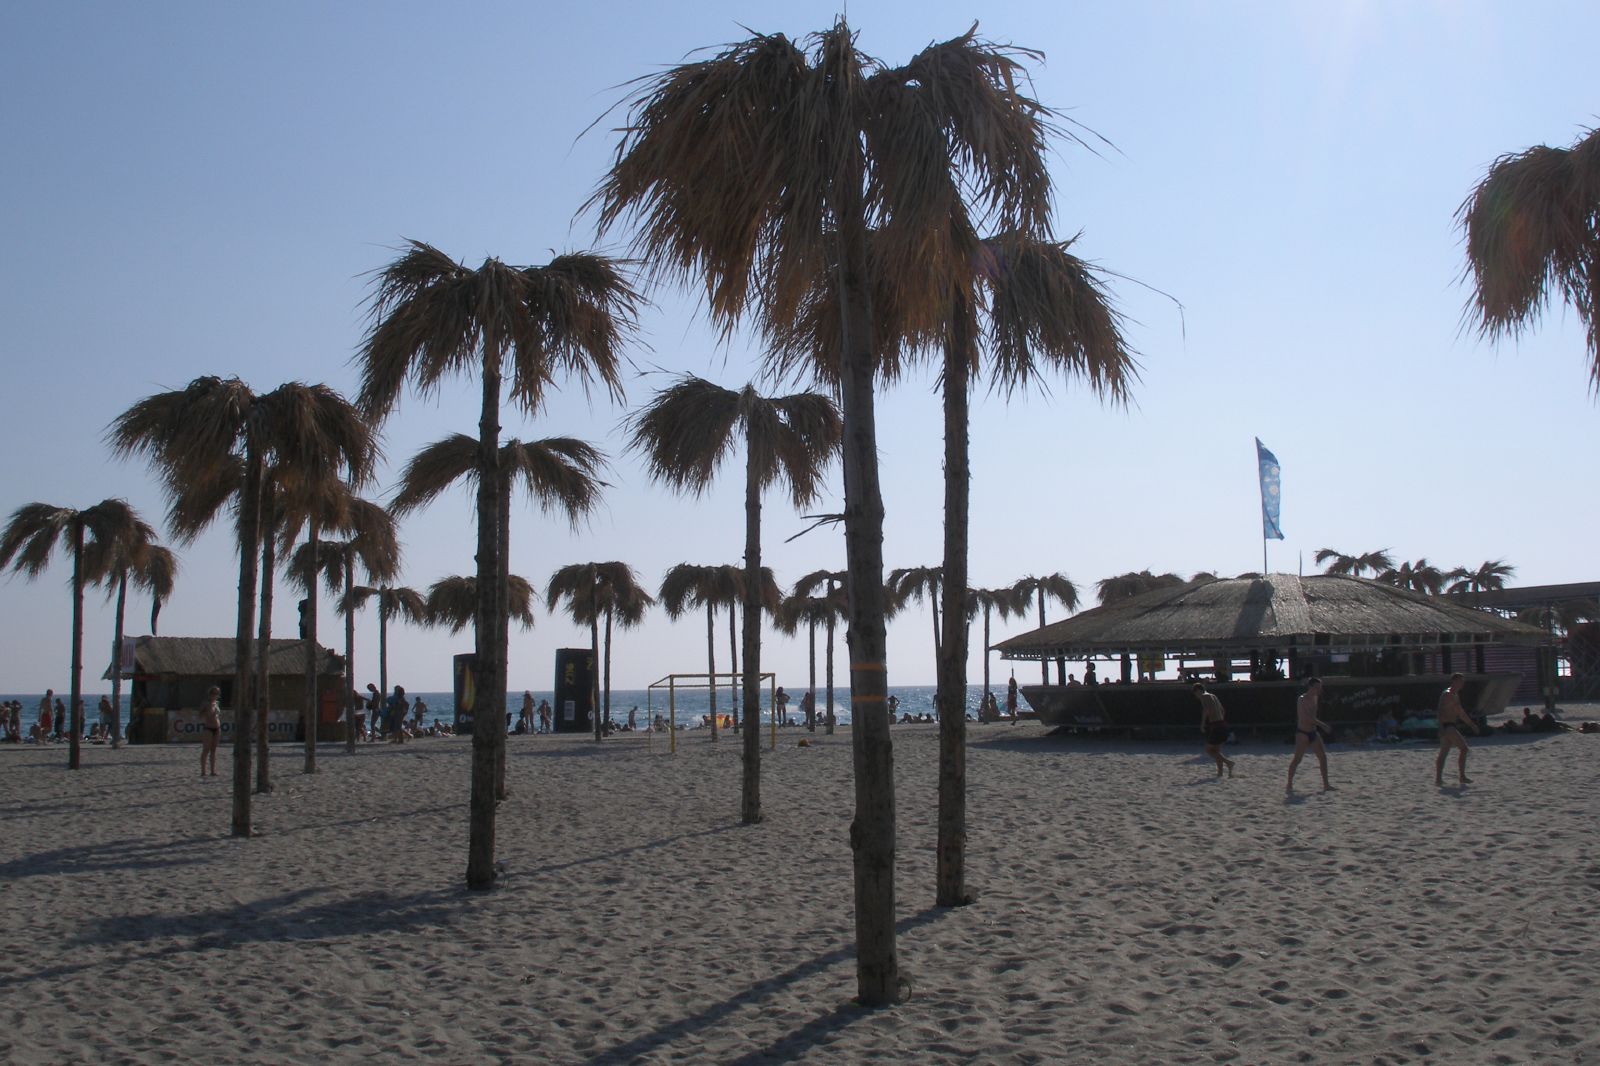 many palm trees are standing on a sandy beach